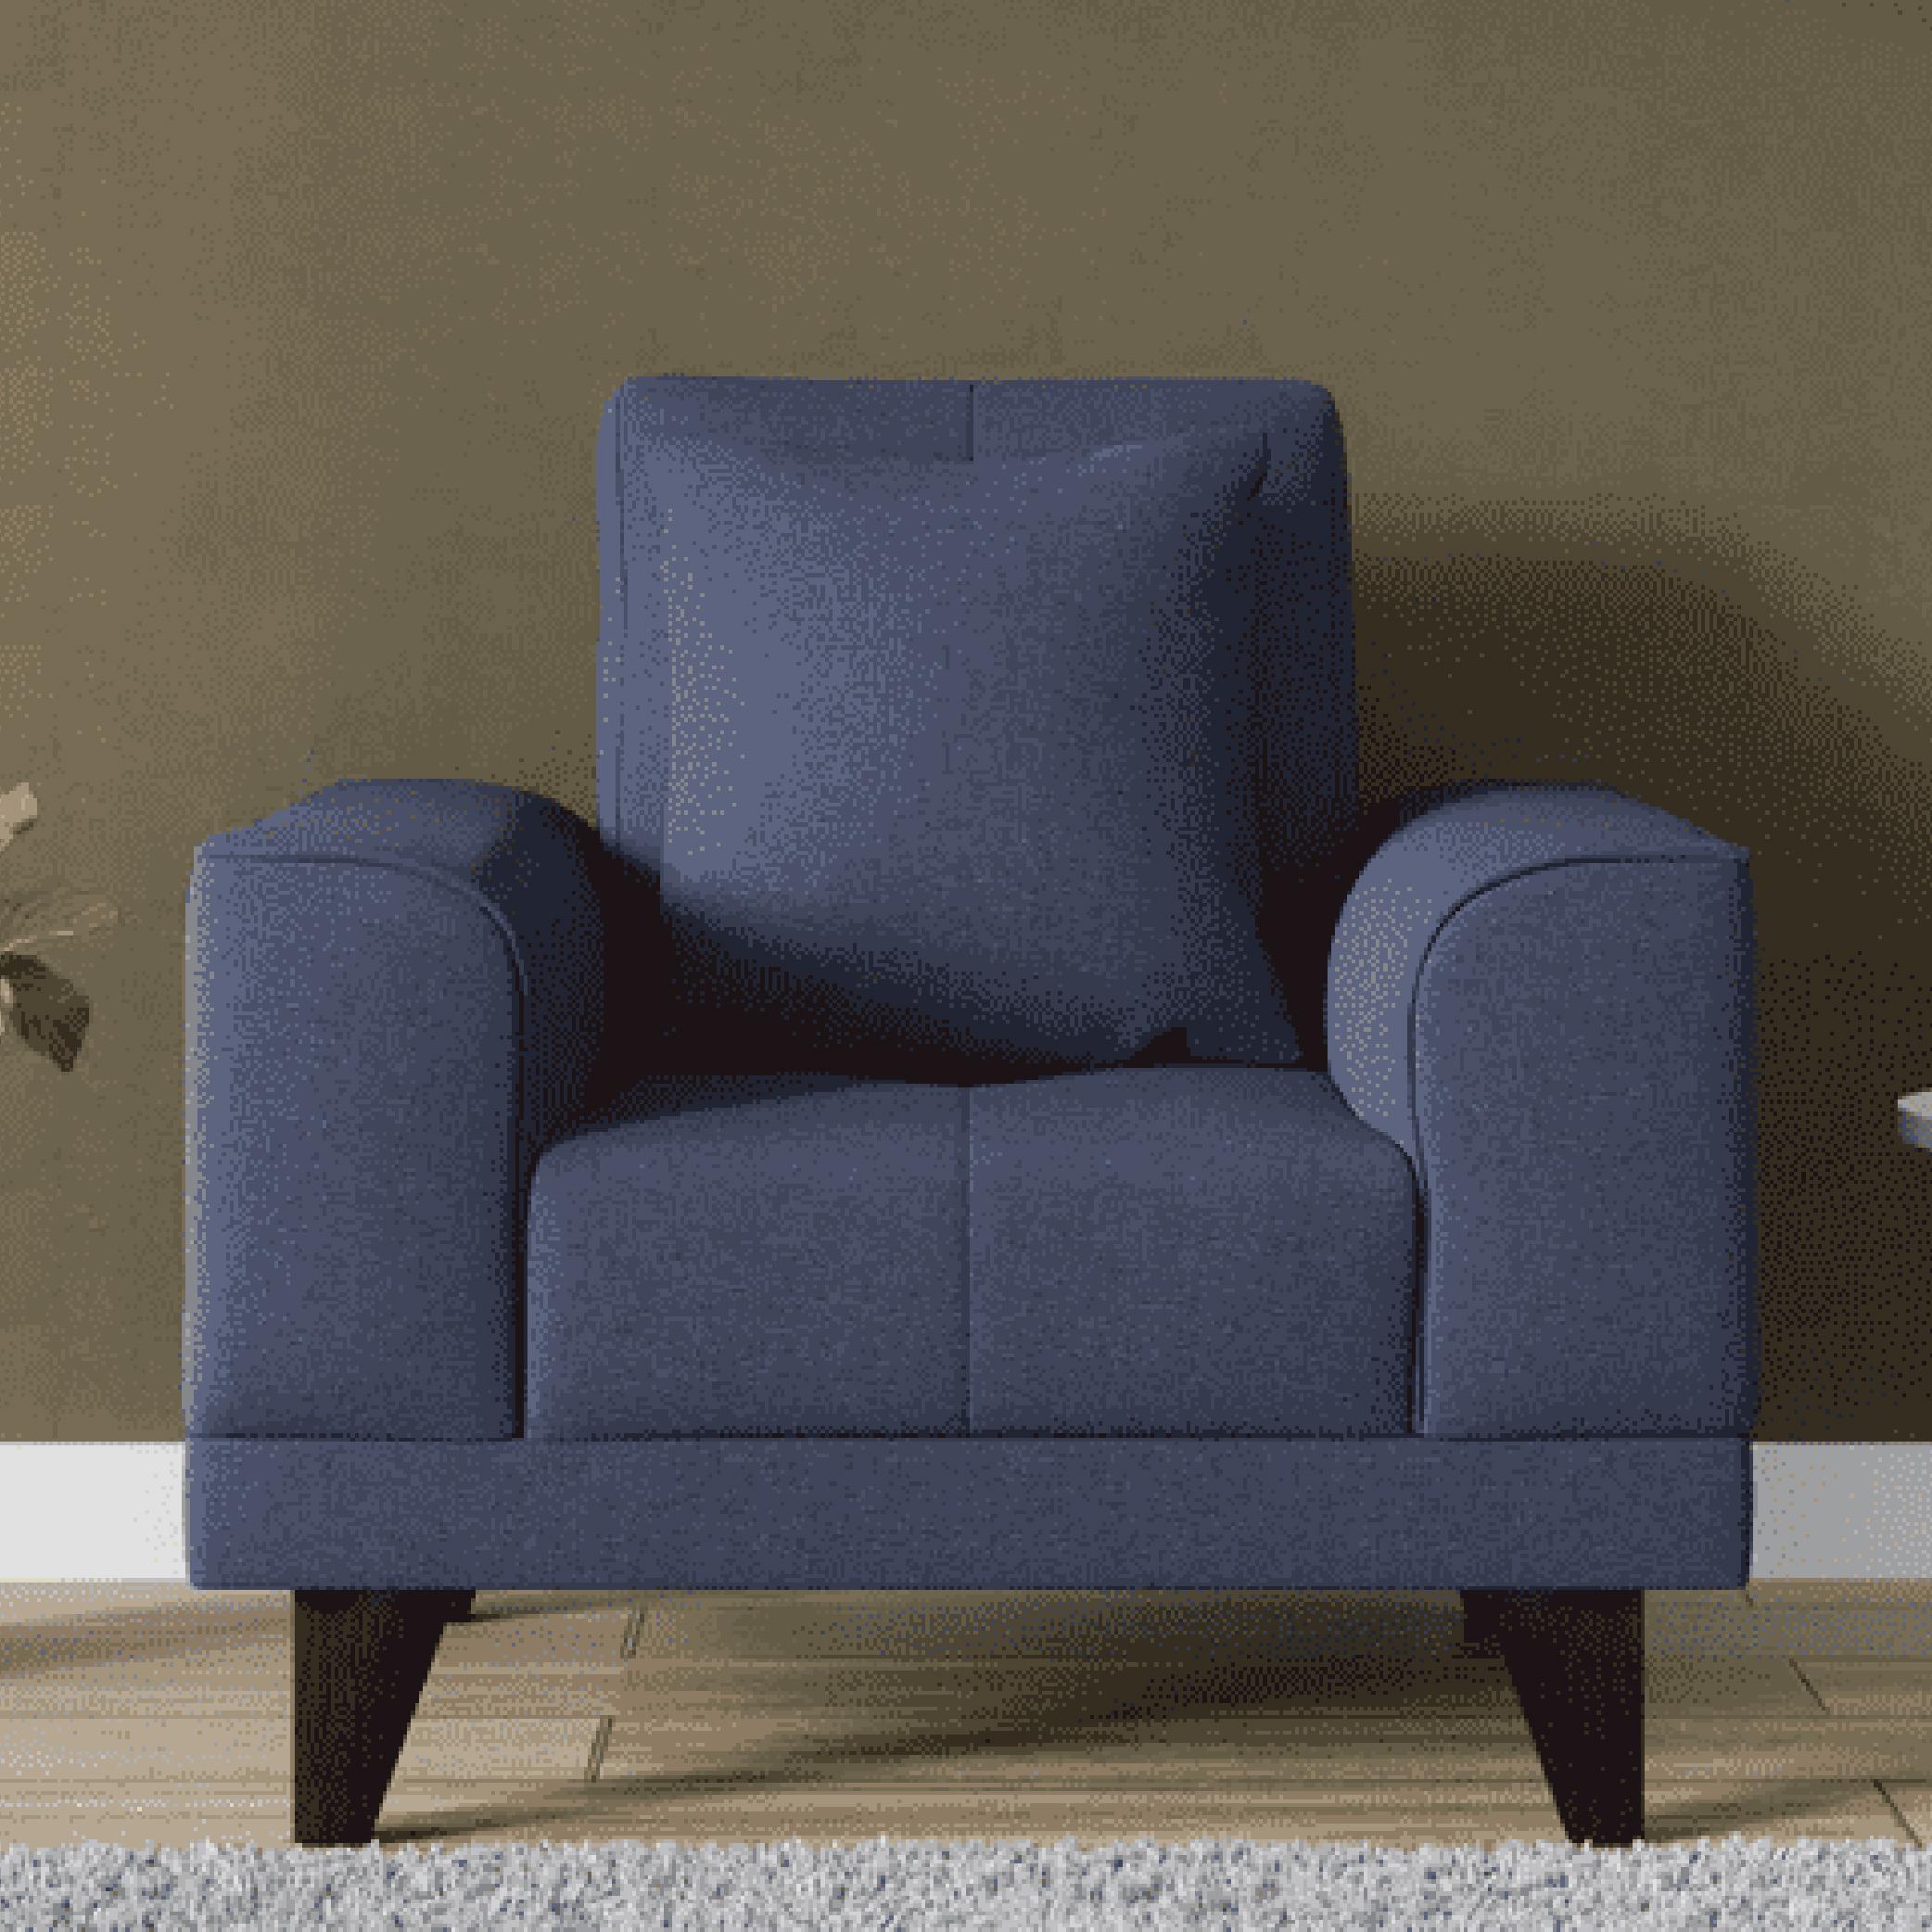 Arco One Seater Sofa in Navy Blue Colour